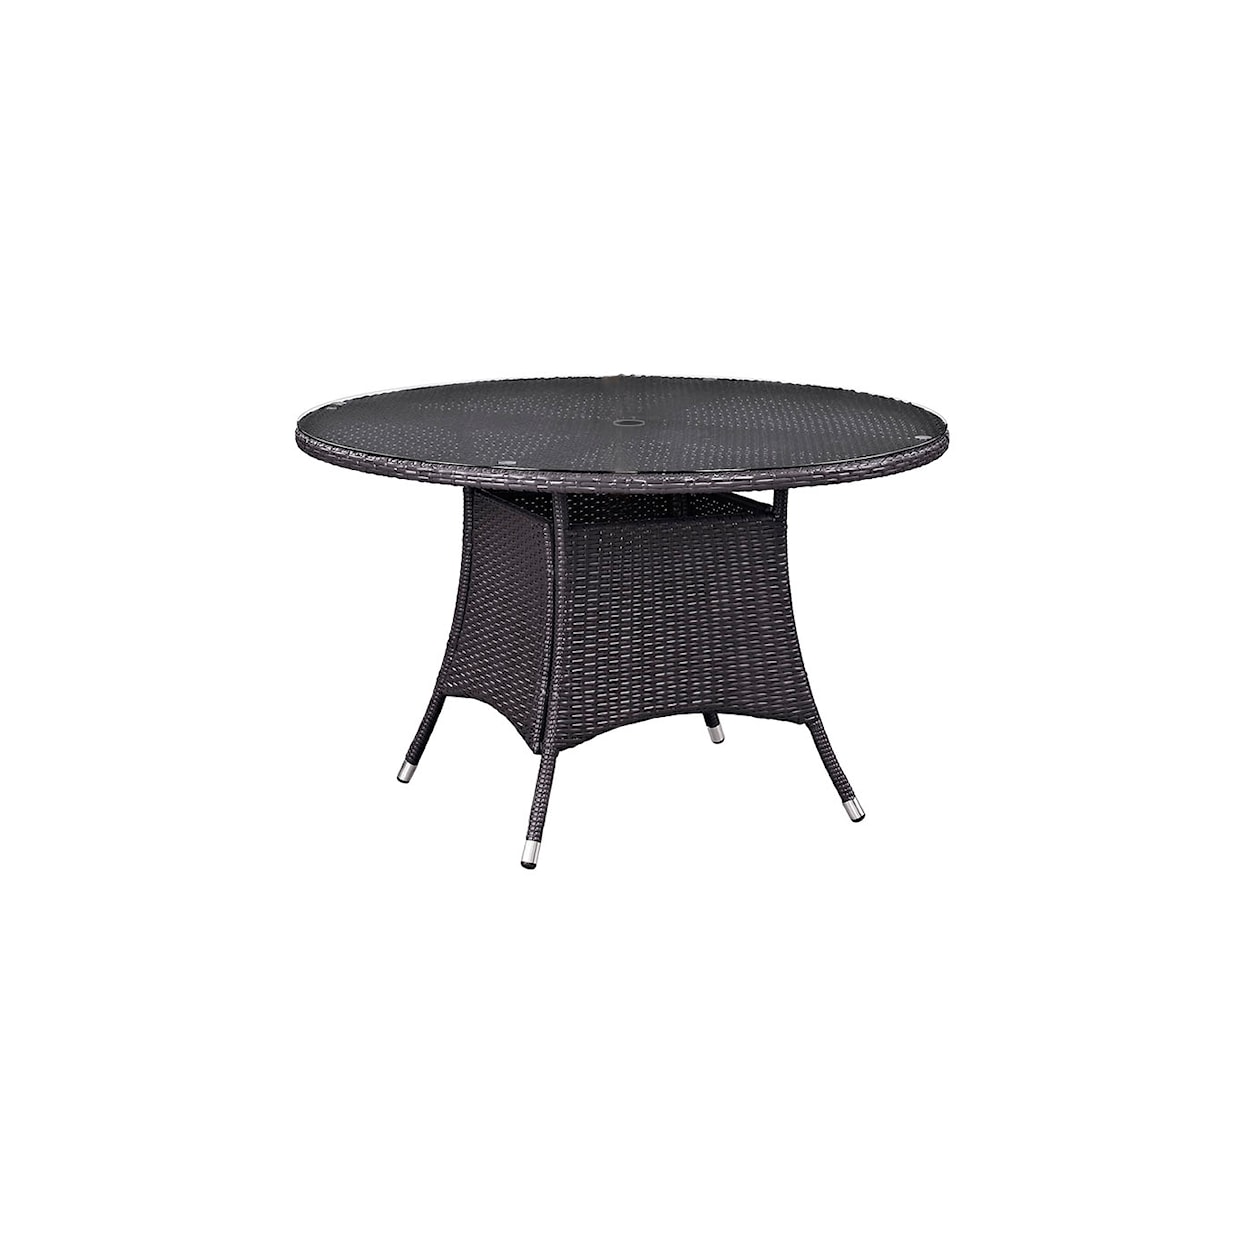 Modway Convene 47" Round Outdoor Dining Table